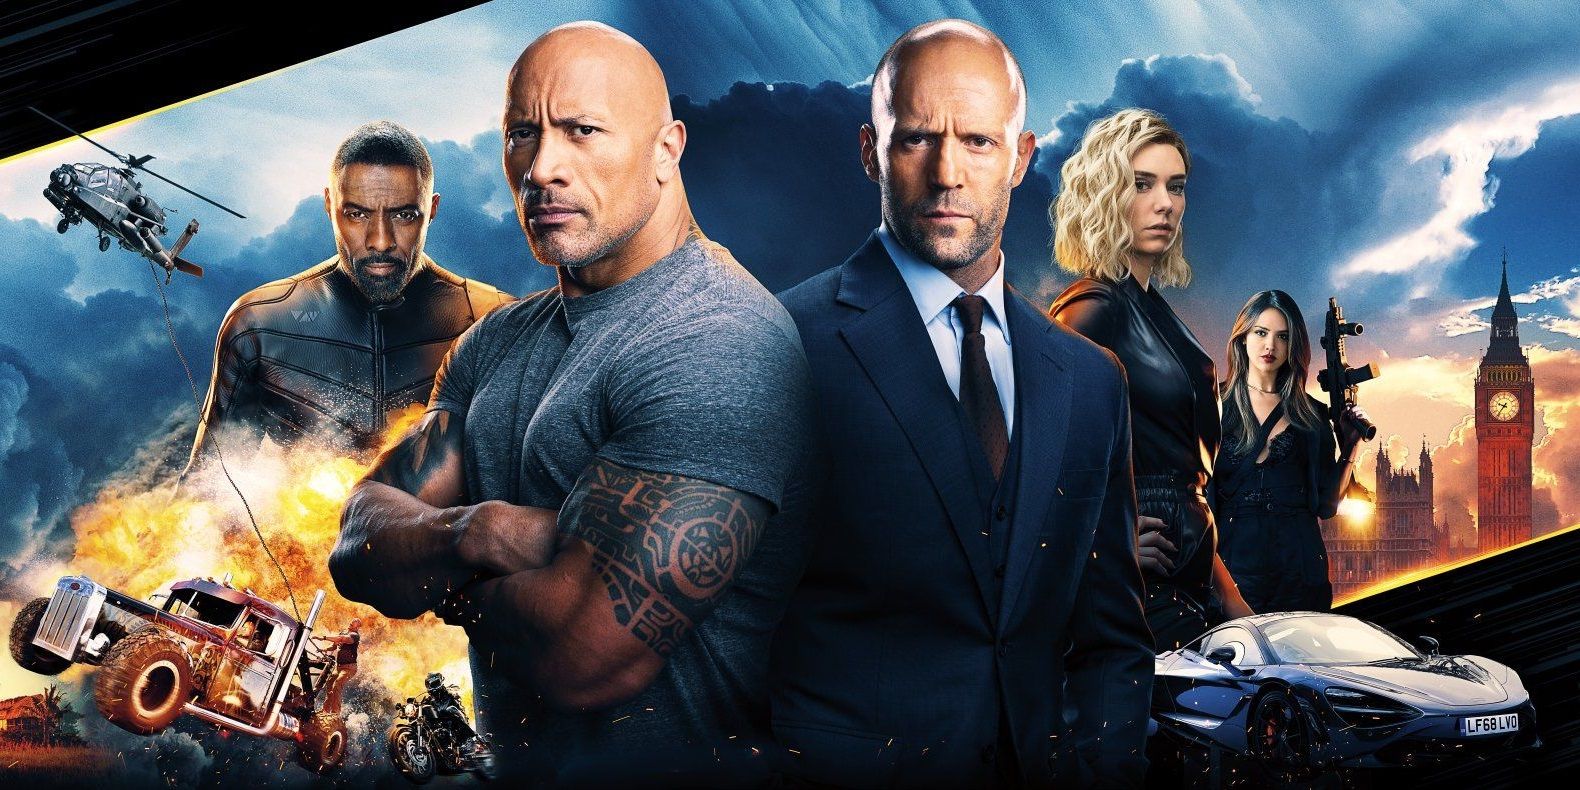 Dwayne Johnson and Jason Statham on the poster for Hobbs and Shaw